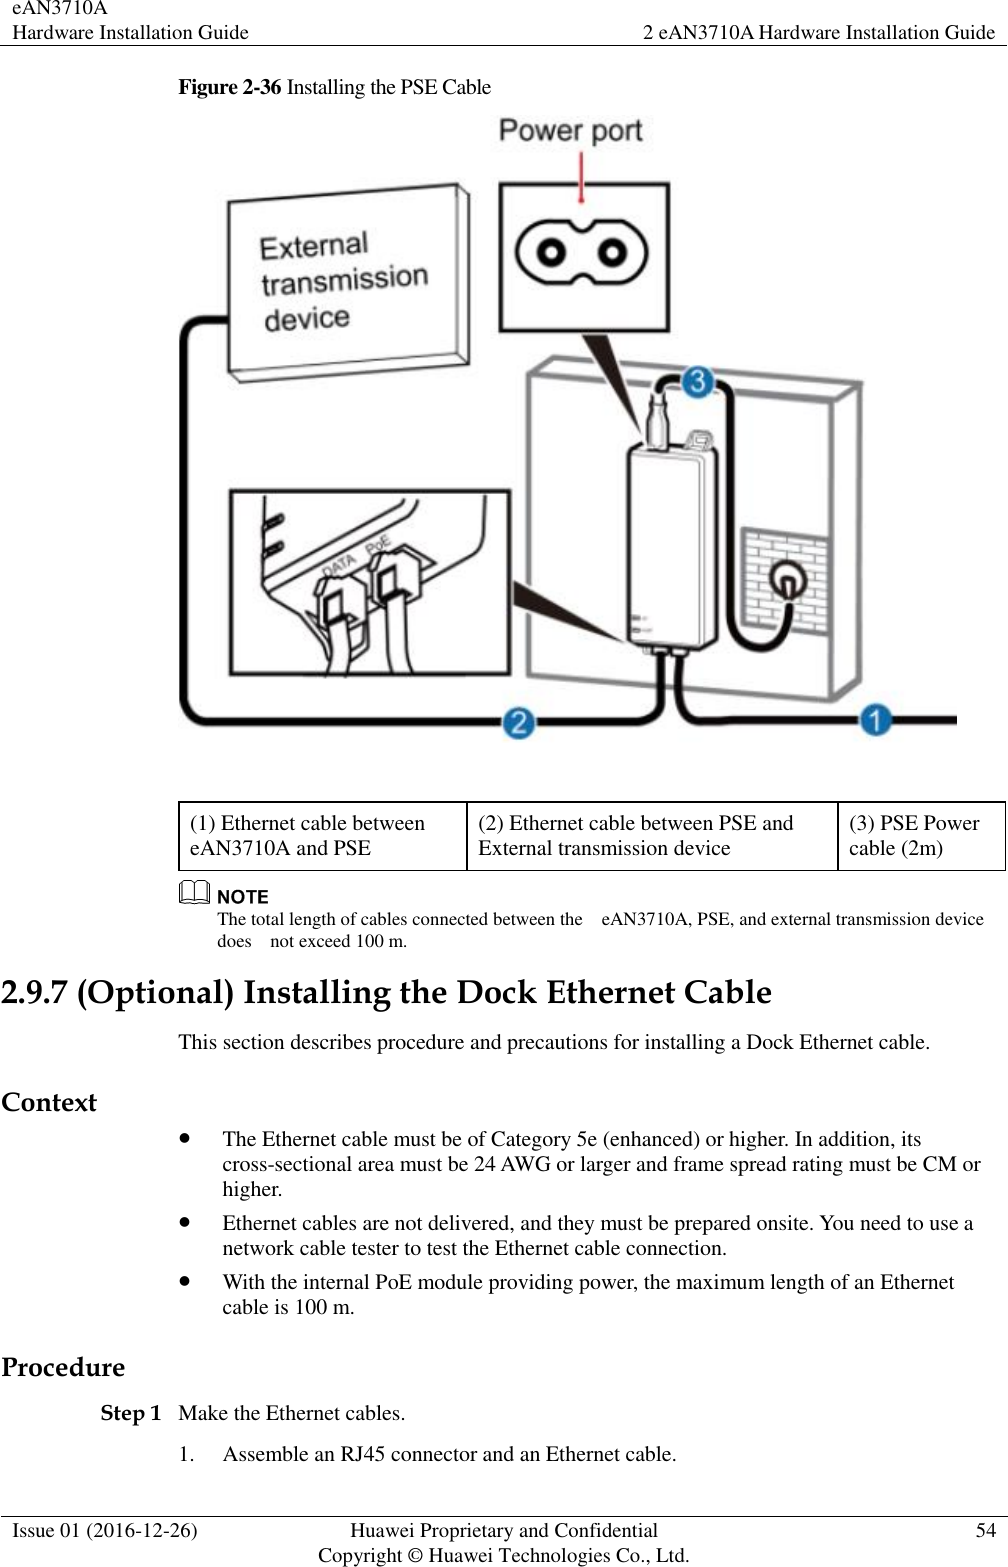 eAN3710A Hardware Installation Guide 2 eAN3710A Hardware Installation Guide  Issue 01 (2016-12-26) Huawei Proprietary and Confidential                                     Copyright © Huawei Technologies Co., Ltd. 54  Figure 2-36 Installing the PSE Cable   (1) Ethernet cable between eAN3710A and PSE   (2) Ethernet cable between PSE and External transmission device   (3) PSE Power cable (2m)    The total length of cables connected between the    eAN3710A, PSE, and external transmission device does    not exceed 100 m.   2.9.7 (Optional) Installing the Dock Ethernet Cable This section describes procedure and precautions for installing a Dock Ethernet cable. Context  The Ethernet cable must be of Category 5e (enhanced) or higher. In addition, its cross-sectional area must be 24 AWG or larger and frame spread rating must be CM or higher.  Ethernet cables are not delivered, and they must be prepared onsite. You need to use a network cable tester to test the Ethernet cable connection.  With the internal PoE module providing power, the maximum length of an Ethernet cable is 100 m. Procedure Step 1 Make the Ethernet cables. 1. Assemble an RJ45 connector and an Ethernet cable. 